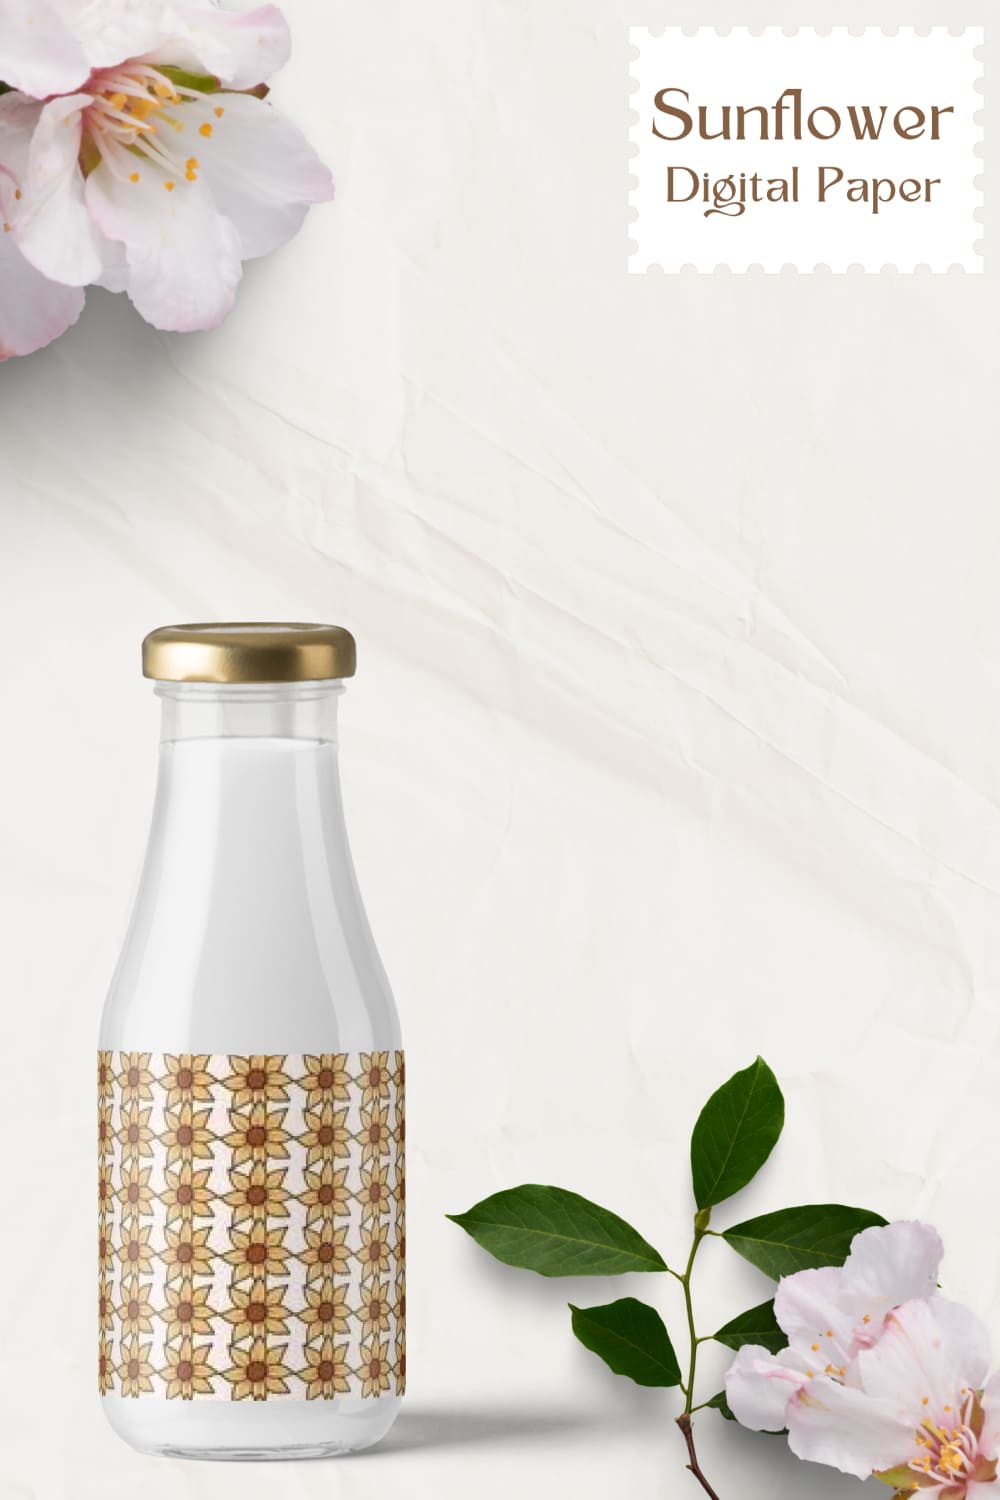 Digital paper with a pattern of a sunflower in the form of a label on a bottle of milk.